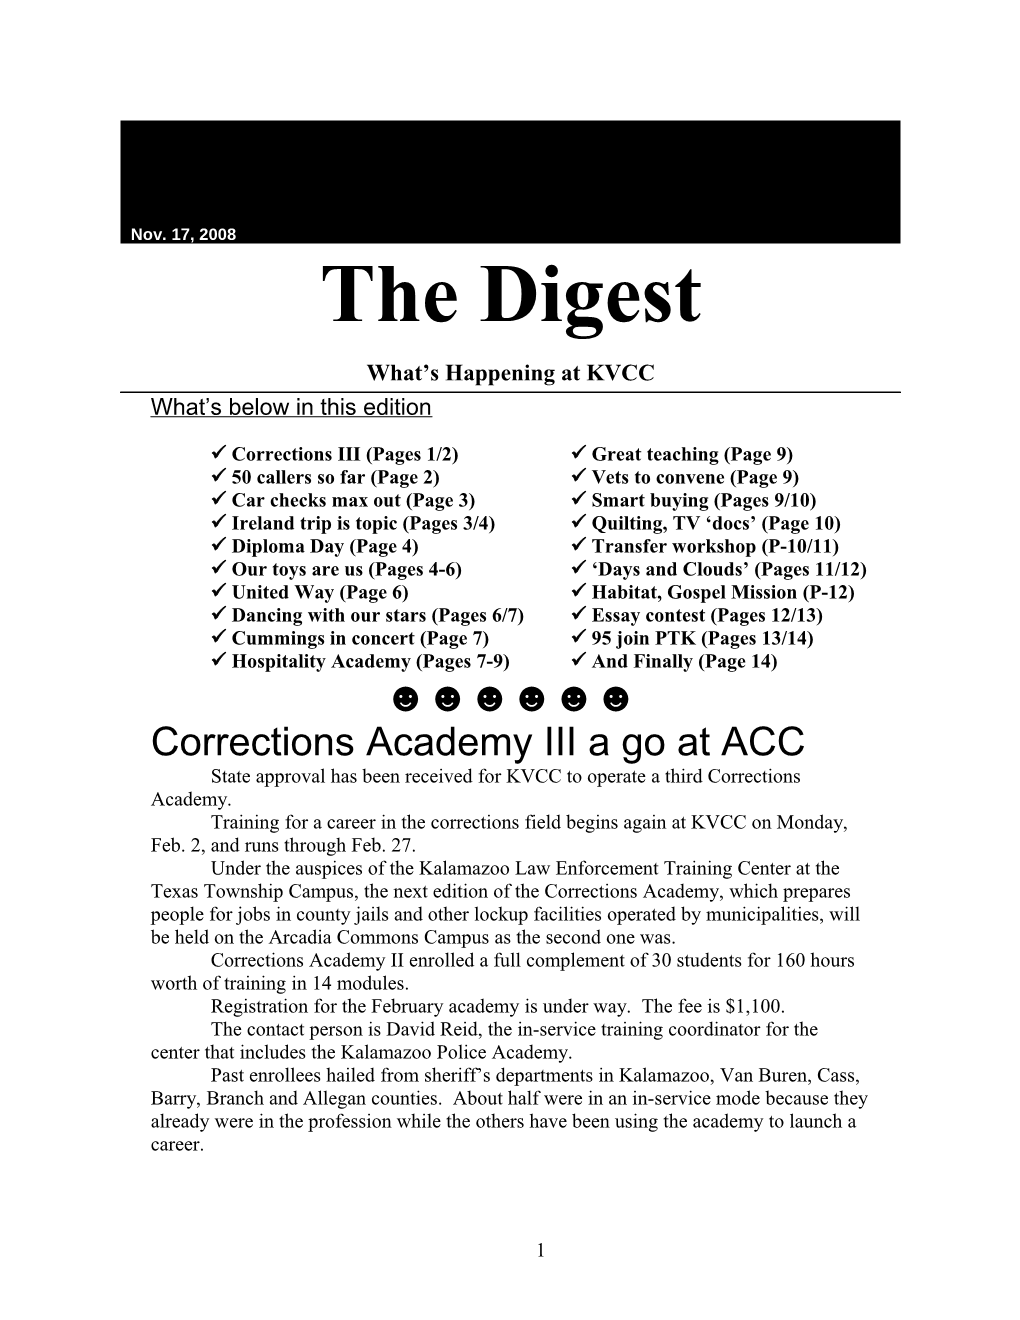 Corrections III (Pages 1/2) Great Teaching (Page 9)